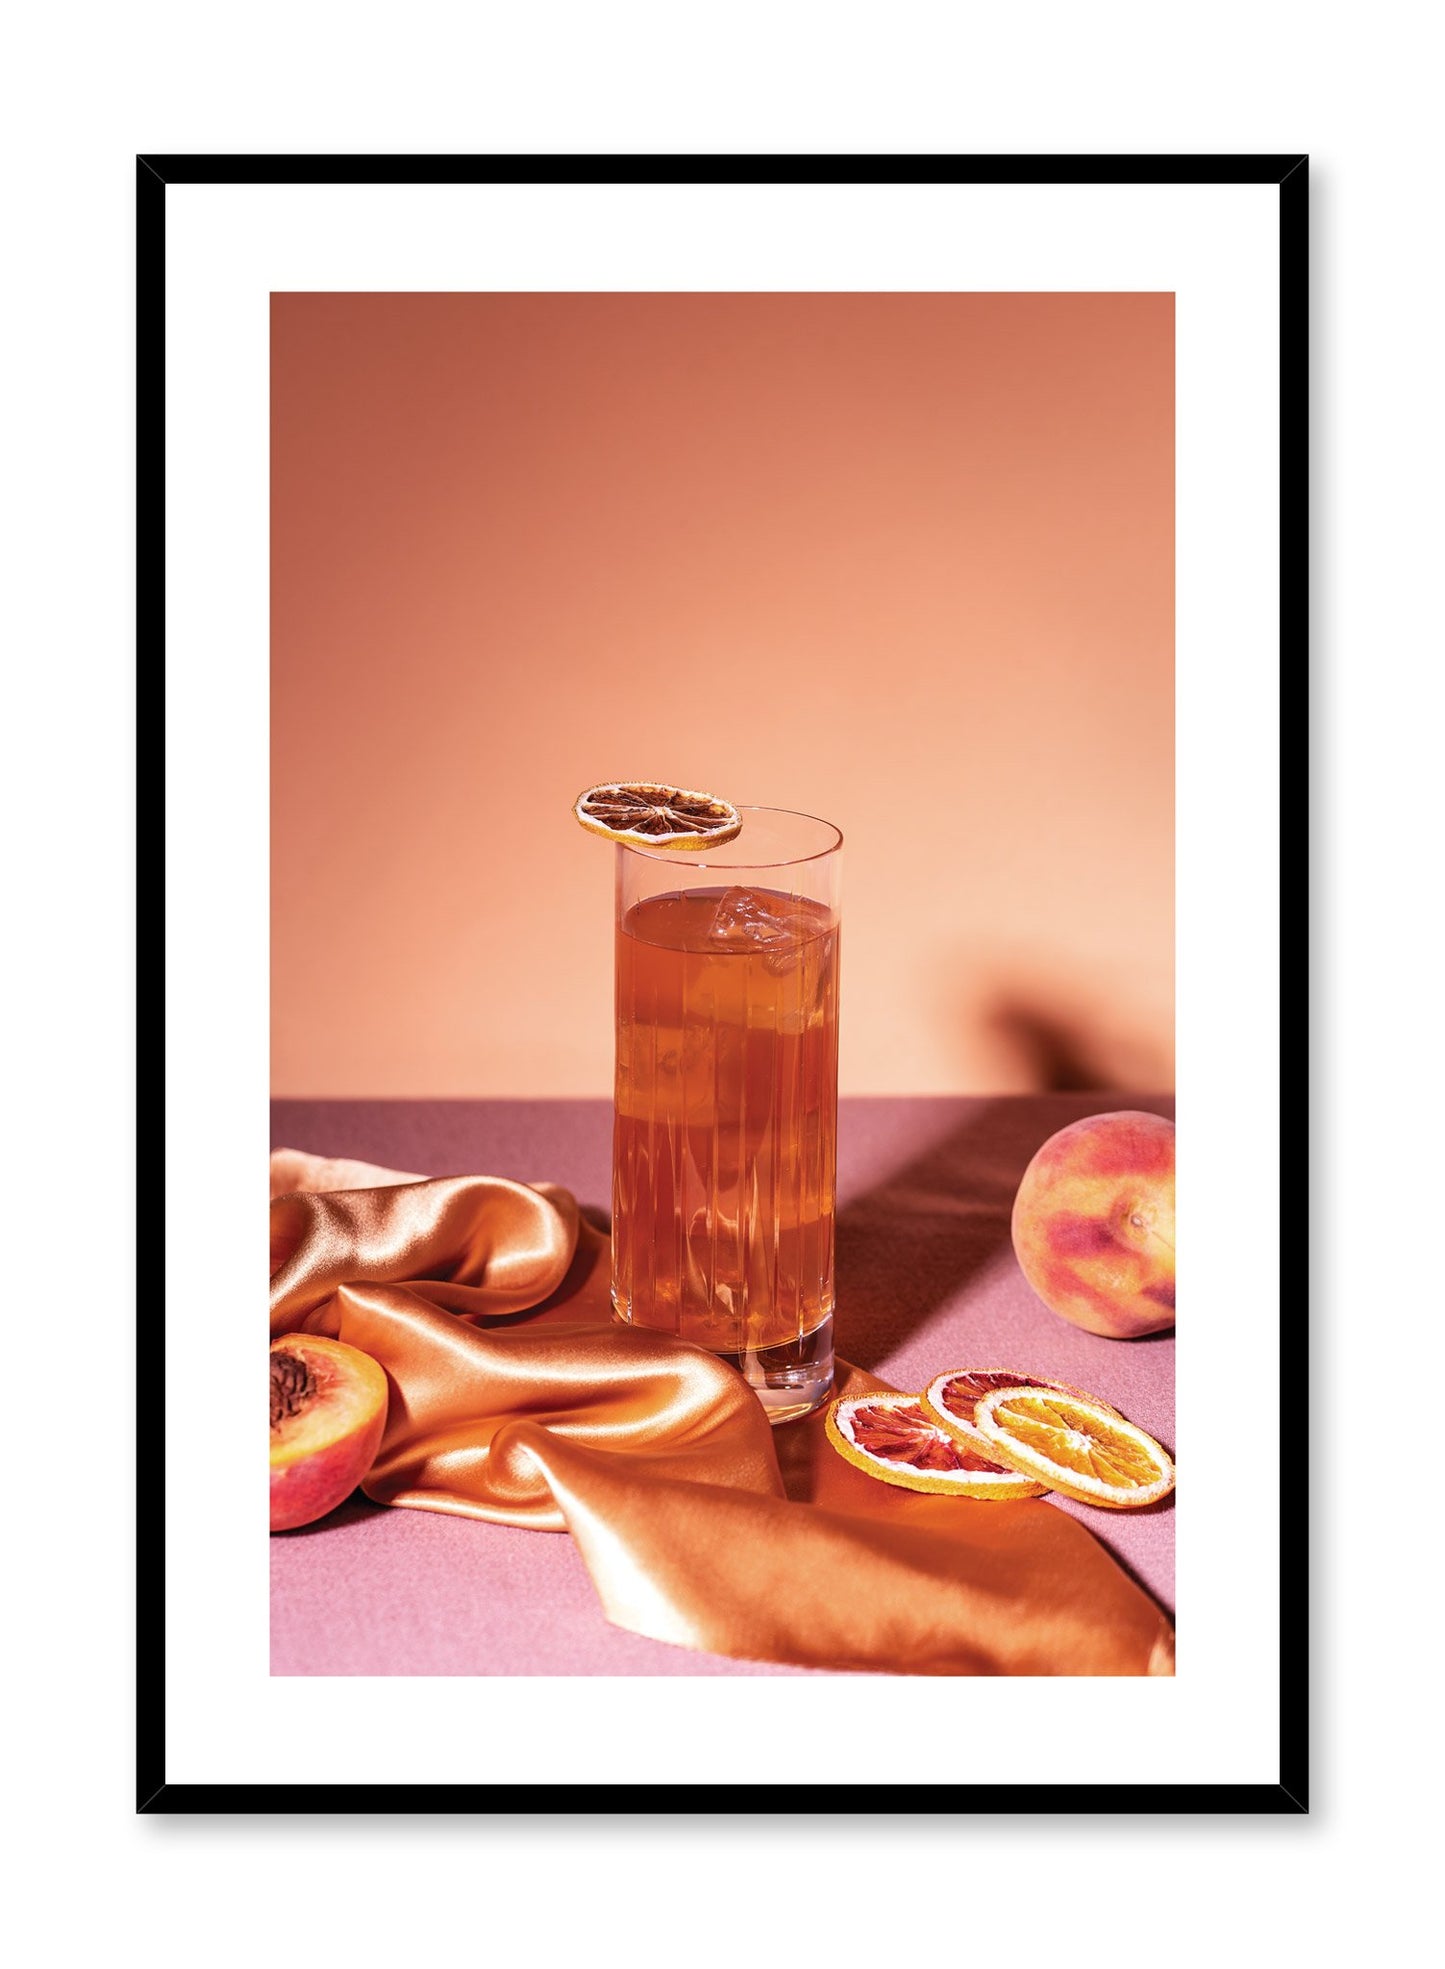 Thirst Quencher is a colourful fruit photography poster by Opposite Wall.